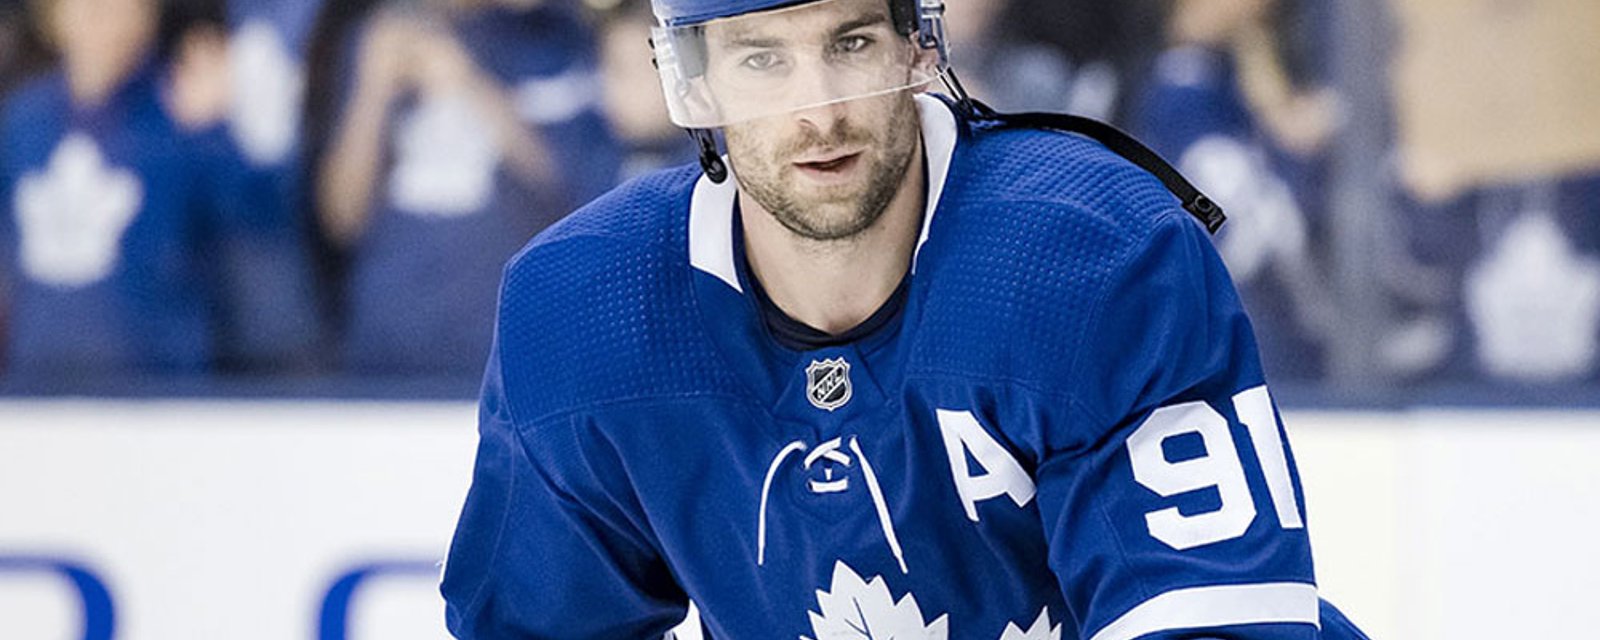 Rumor: Tavares will reportedly be the Leafs' next captain